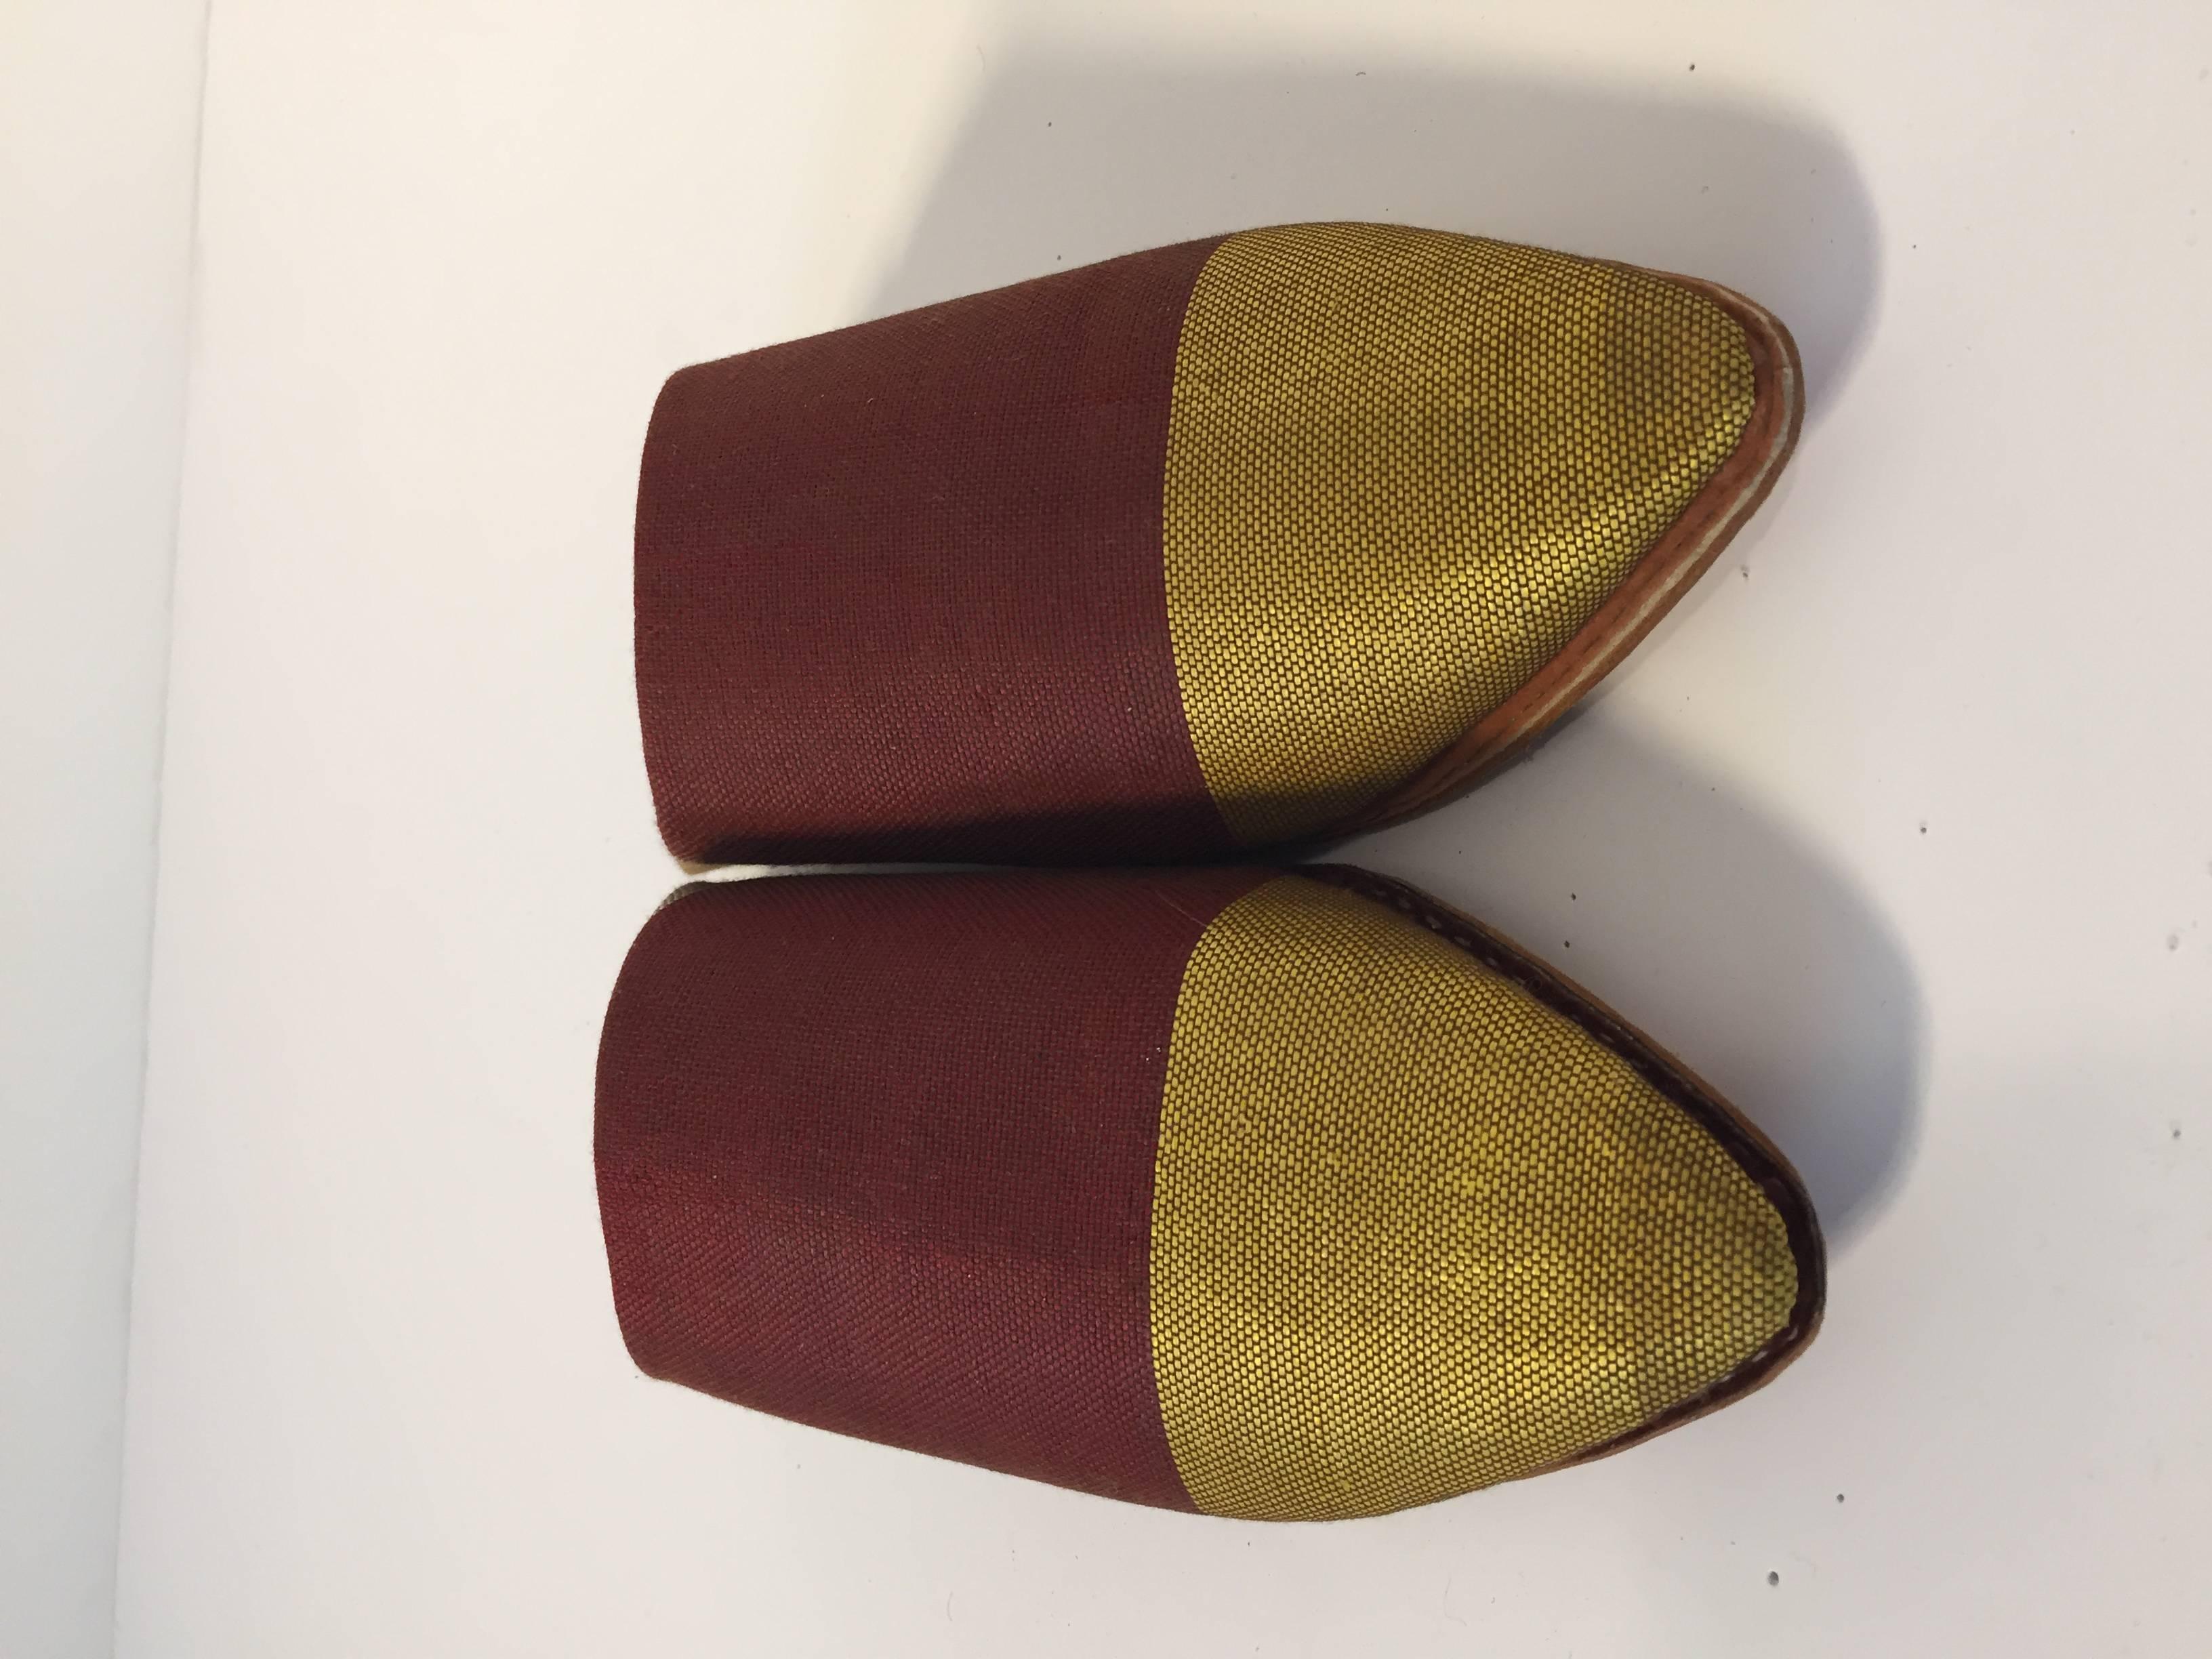 These Moroccan silk slippers are handmade to perfection the inside sole is crafted of soft leather.
These shoes are the traditional Moroccan shoes, all hand made with hand-sewn leather sole.
You won't want to take the Moroccan babouches off your